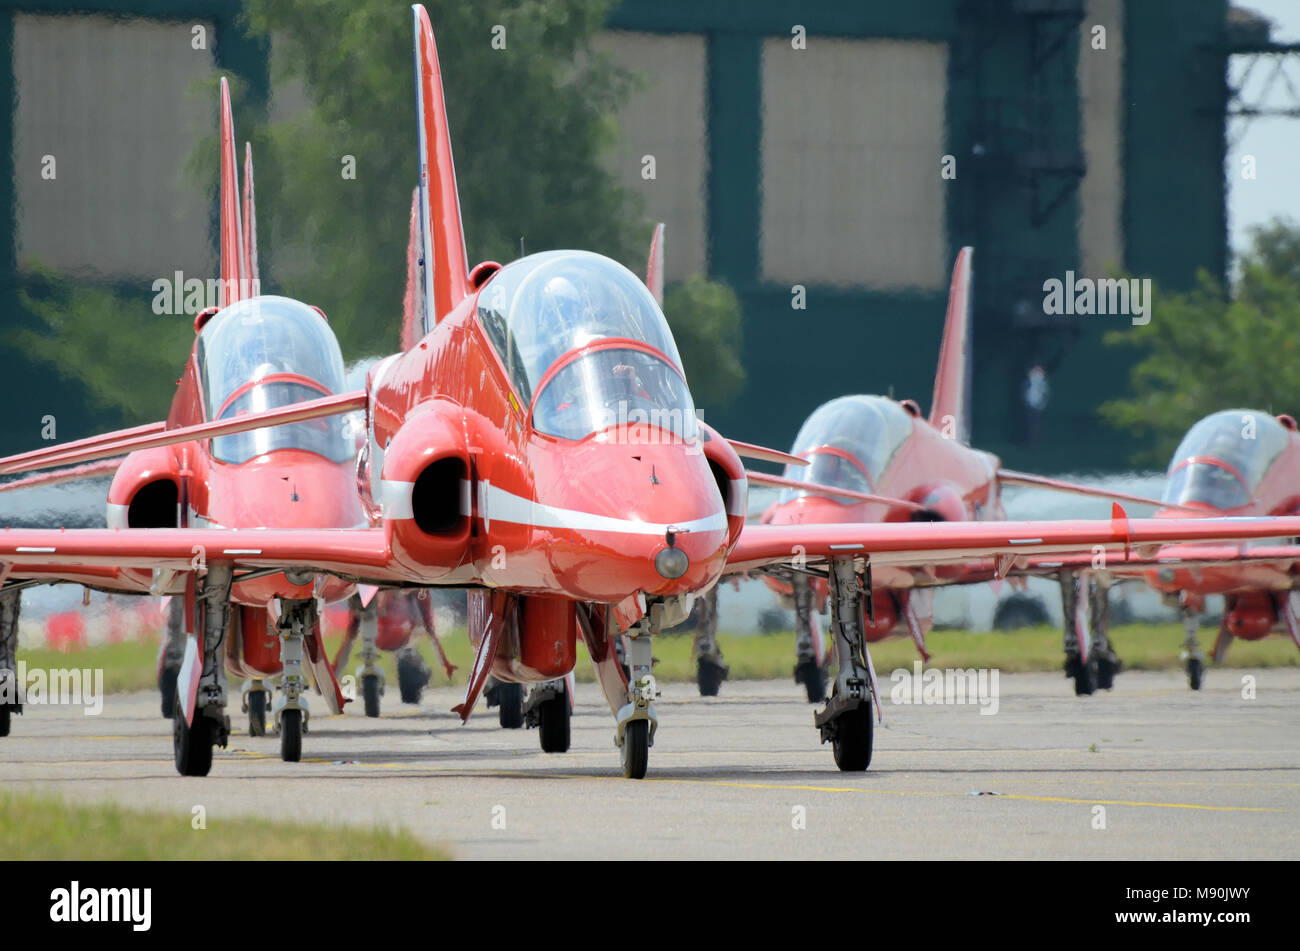 Royal Air Force Red Arrows display team BAe Hawk T1 jet planes taxiing out to display at RAF Scampton. Planes in a queue. Stock Photo